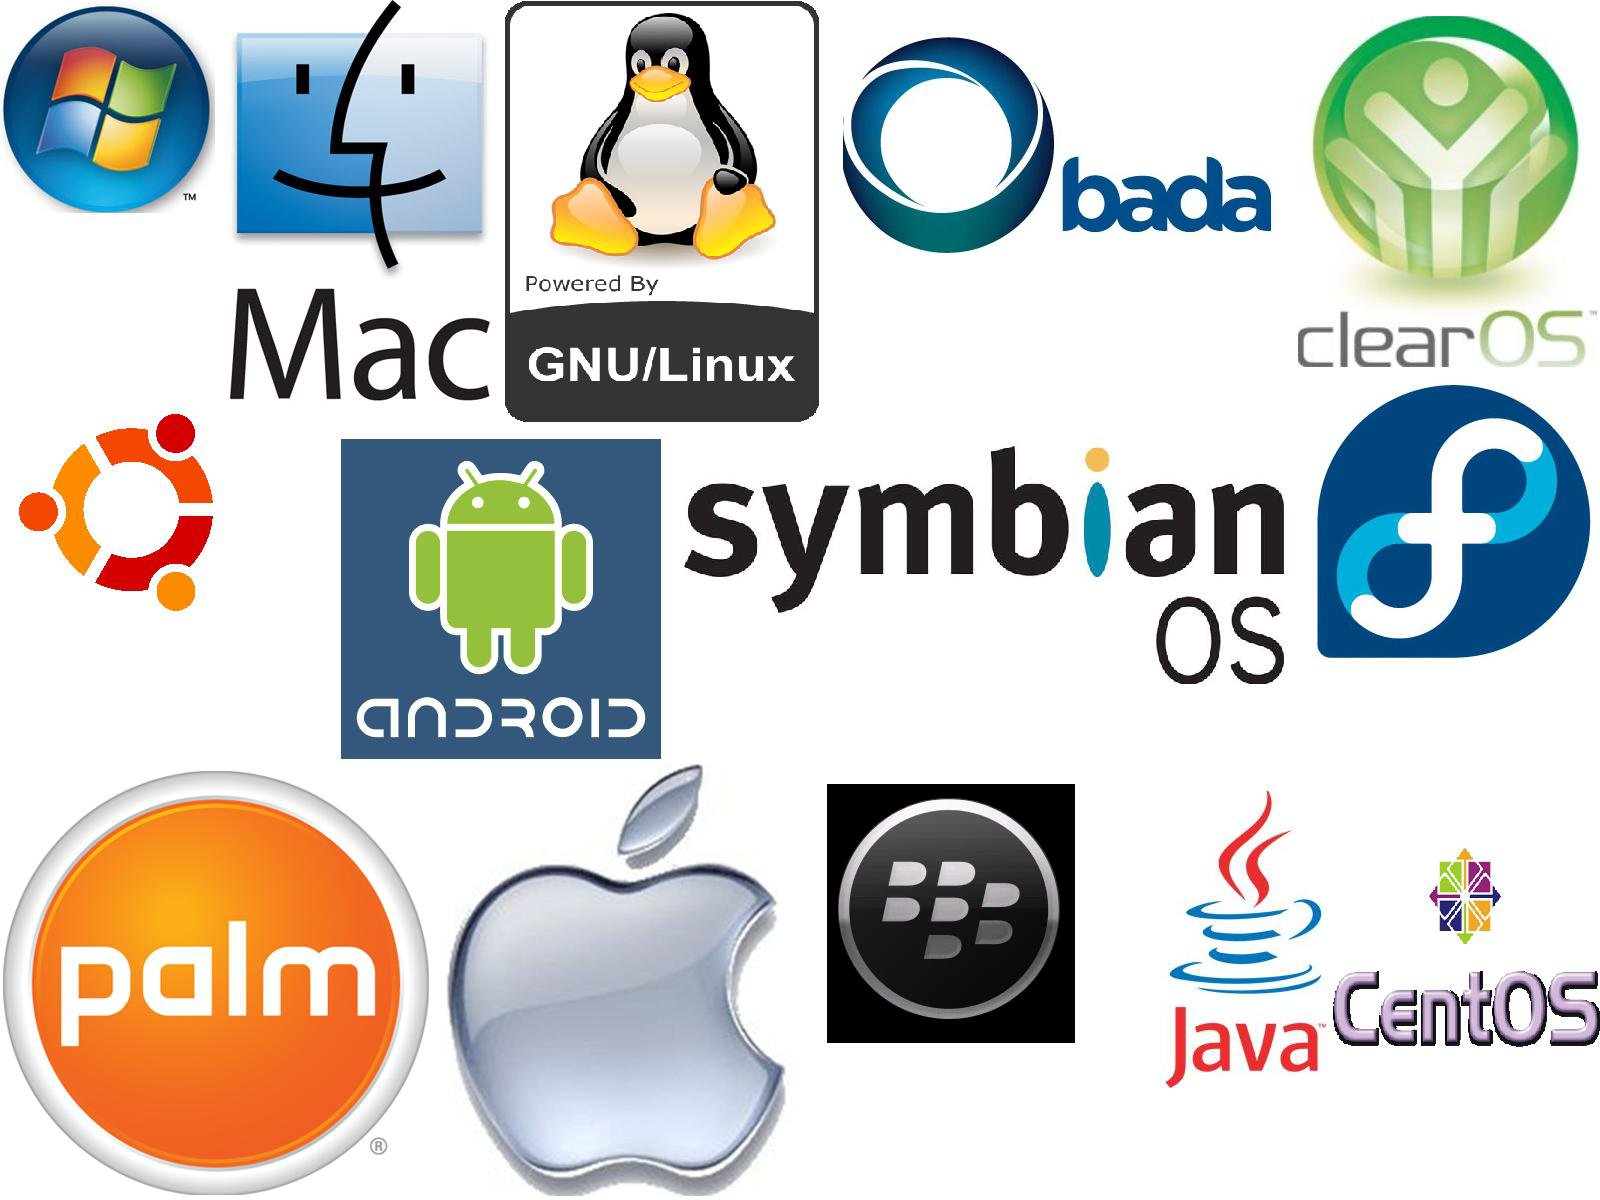 Learn More Than One OS (Operating Systems)